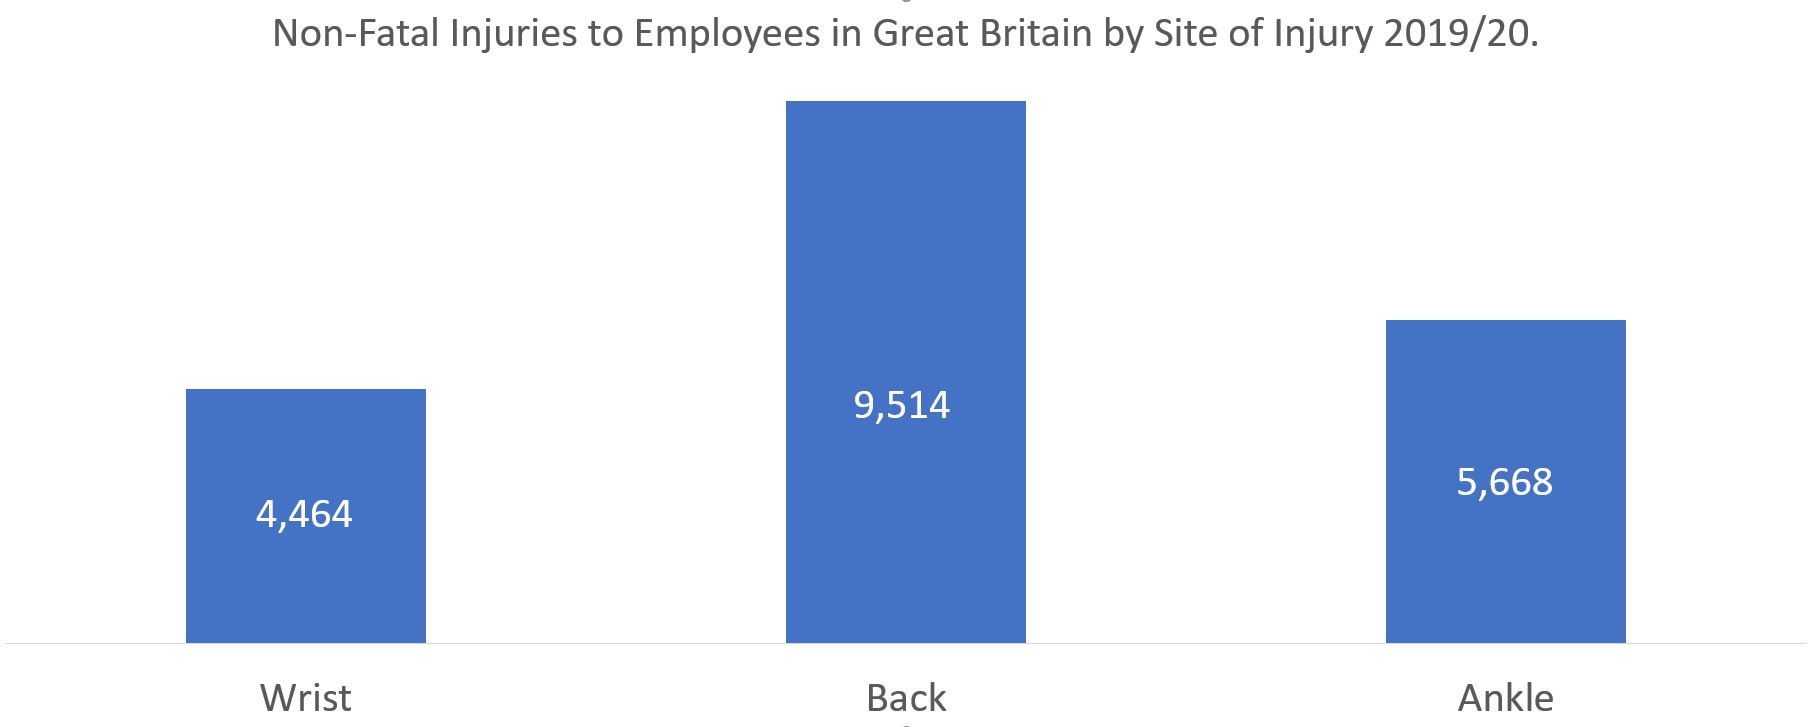 Non-fatal injuries to employees in Great Britain by location of injury